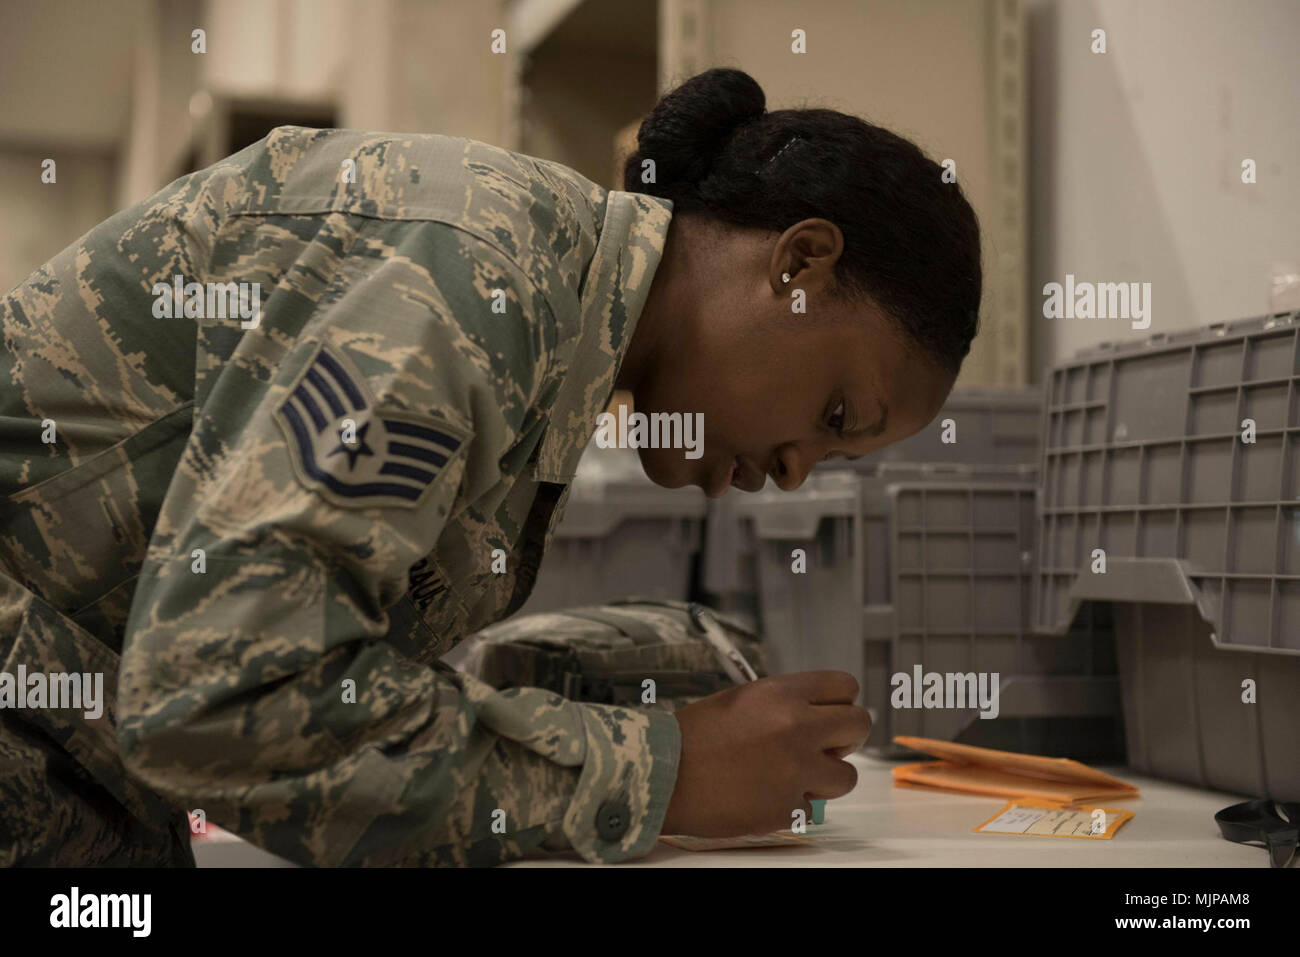 U.S. Air Force Staff Sgt. Sha’leah Paul, 18th Medical Group medical material technician, signs off on the contents of a first-aid kit March 21, 2018, at Kadena Air Base, Japan. Medical materials go through the warehouse managed by the 18th MDG “Log Dogs” before being distributed throughout units both in and outside the medical group building. Armed Forces and civilians displaying courage bravery dedication commitment and sacrifice Stock Photo